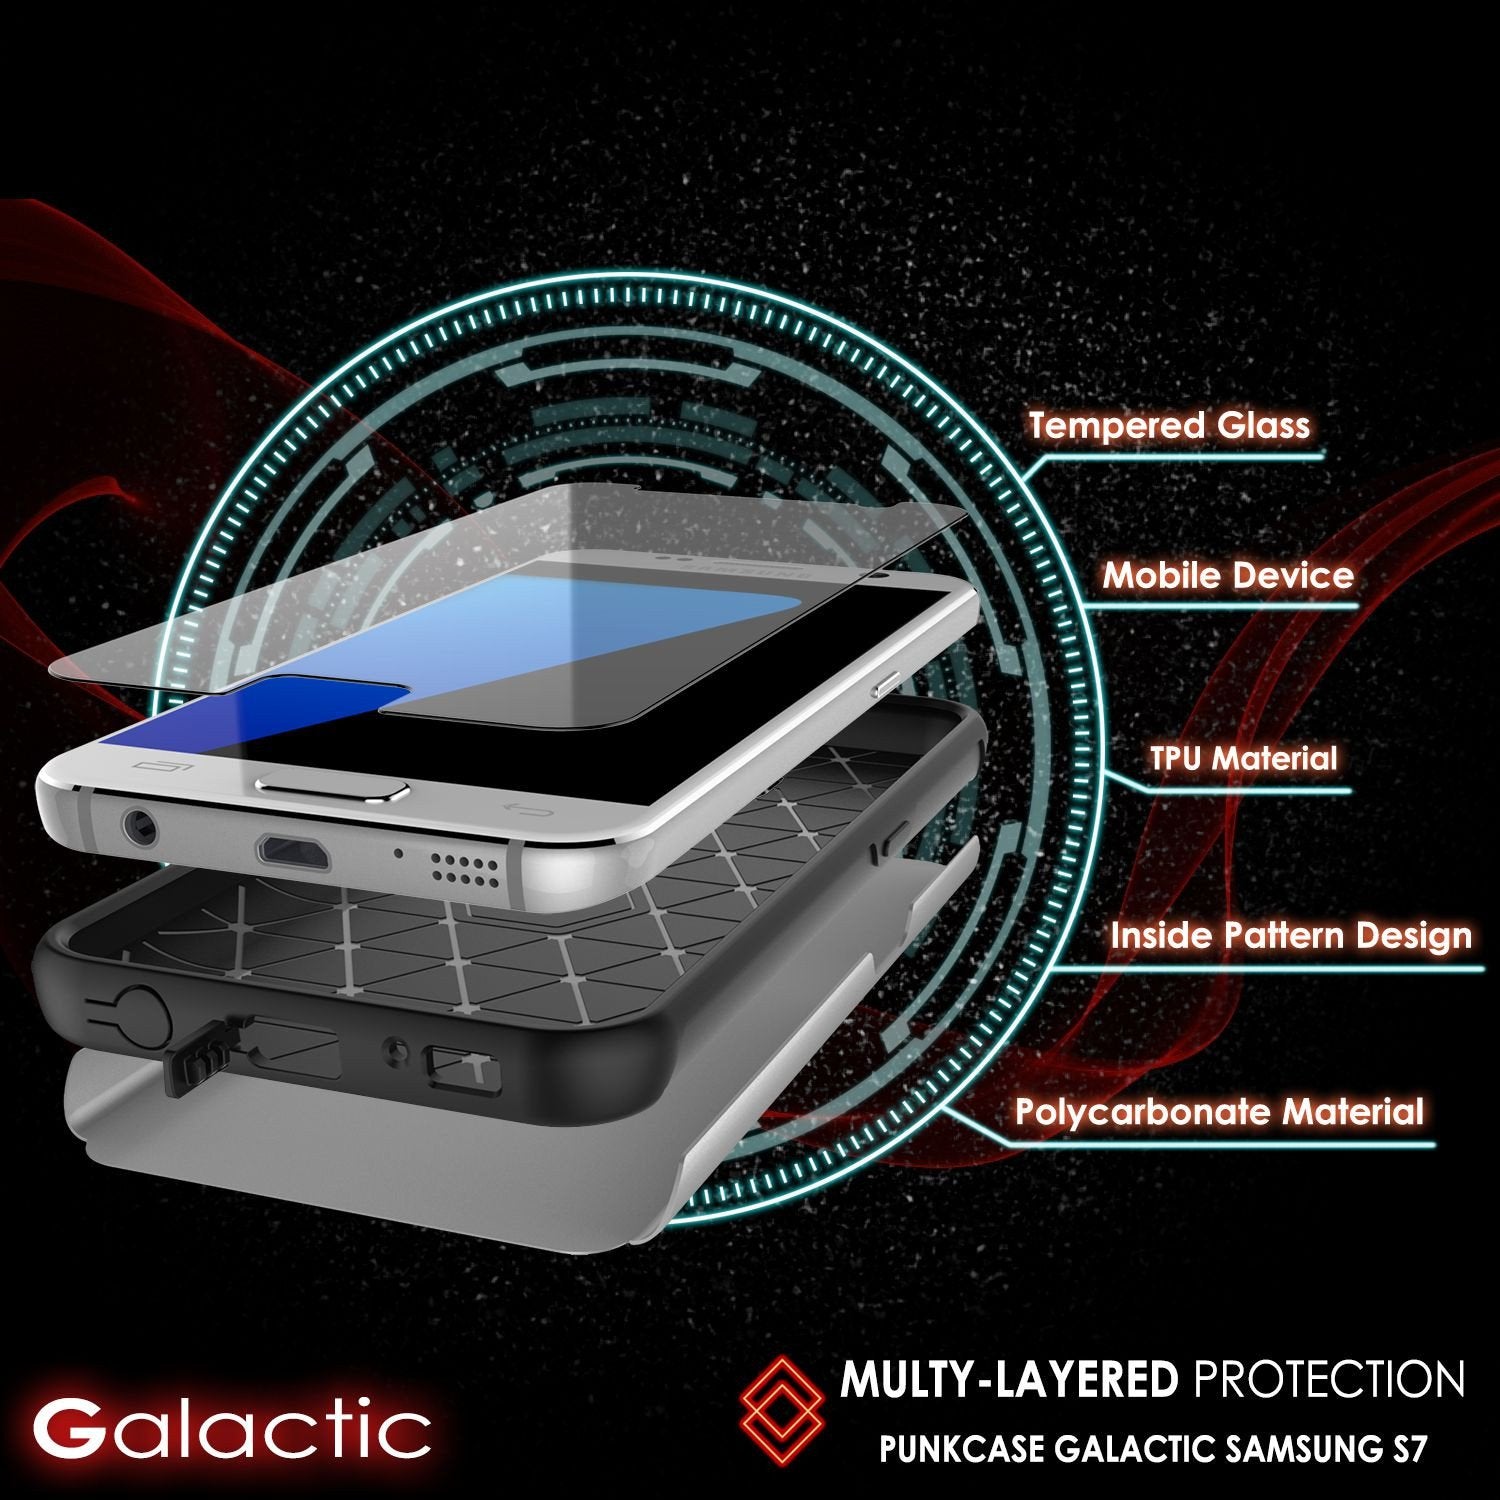 Galaxy s7 Case PunkCase Galactic Silver Slim Protective Armor Soft Cover Case w/ Tempered Glass